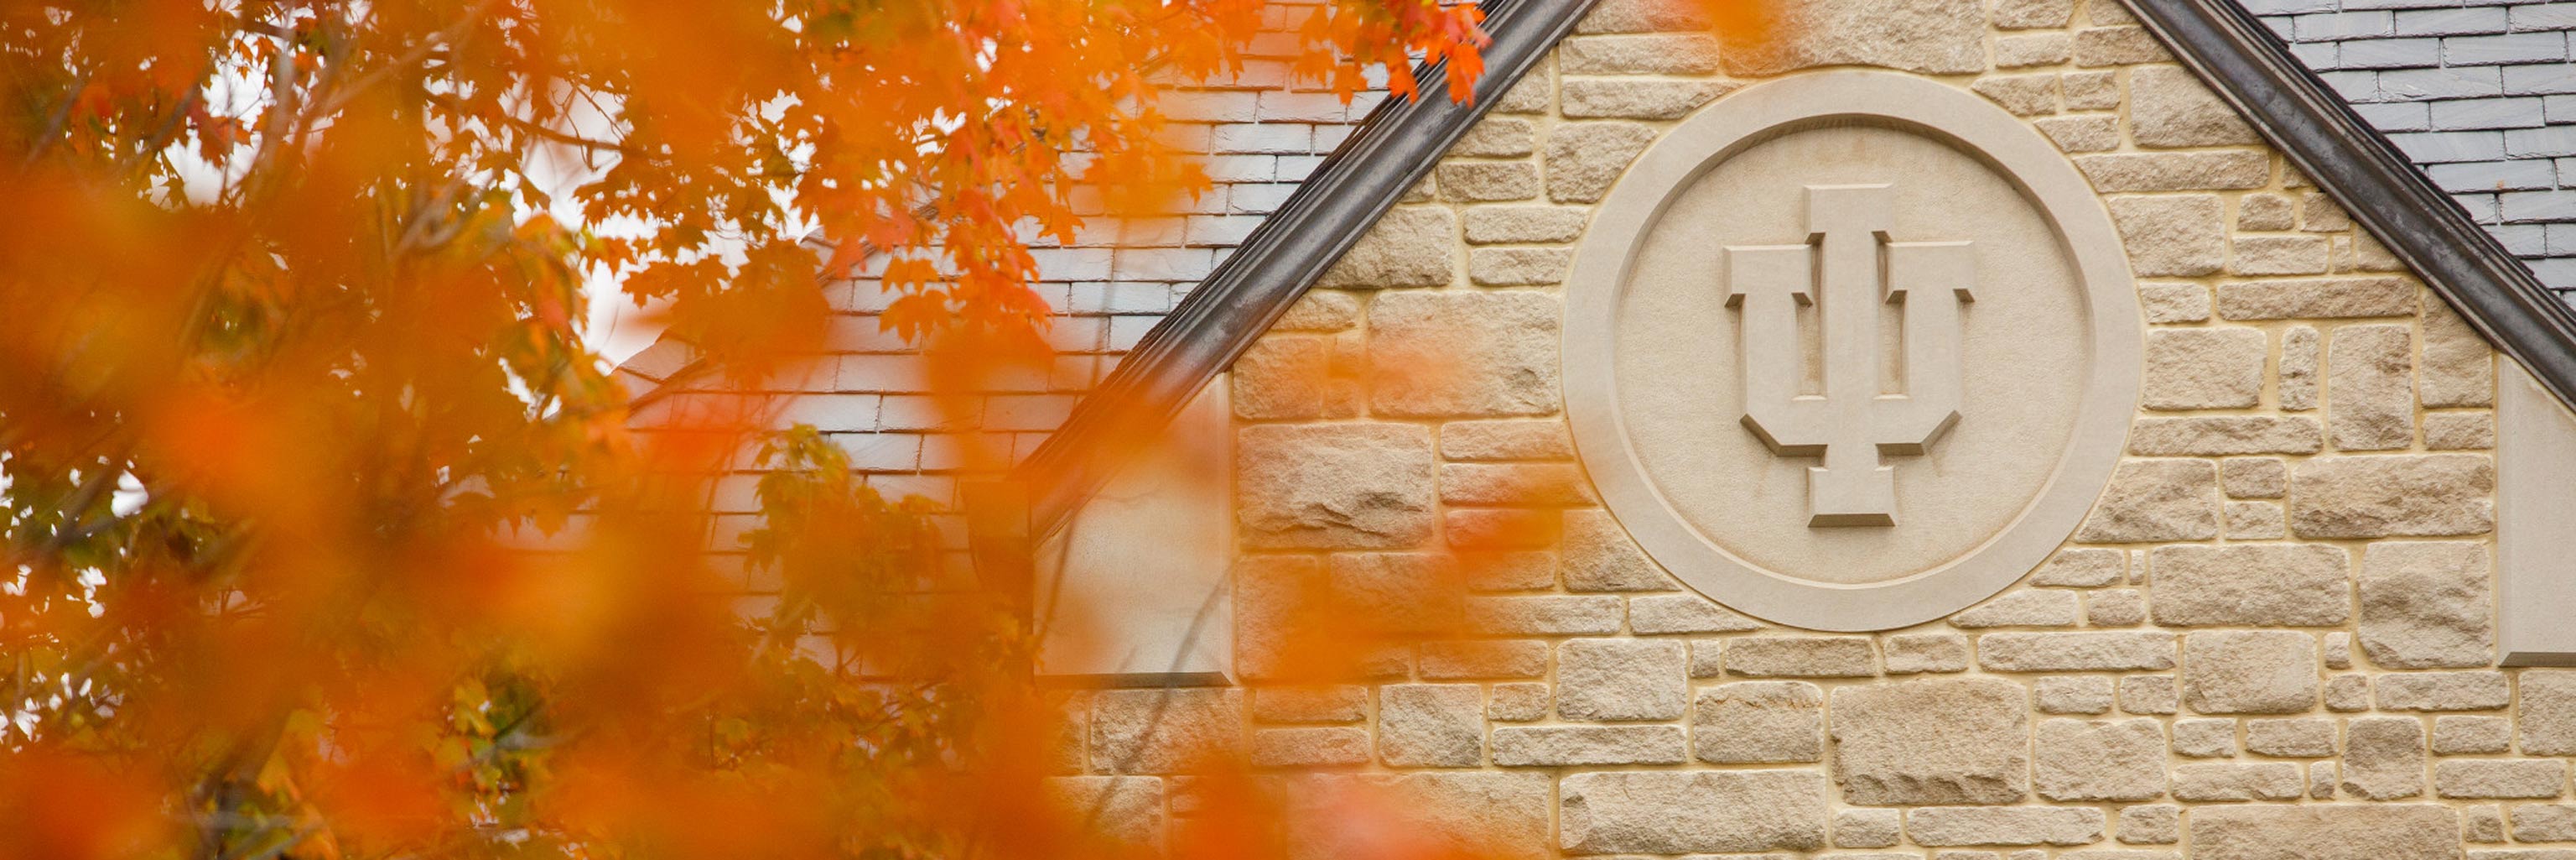 The IU trident is shown embedded in a limestone building, slightly shaded by the orange foliage of a nearby tree